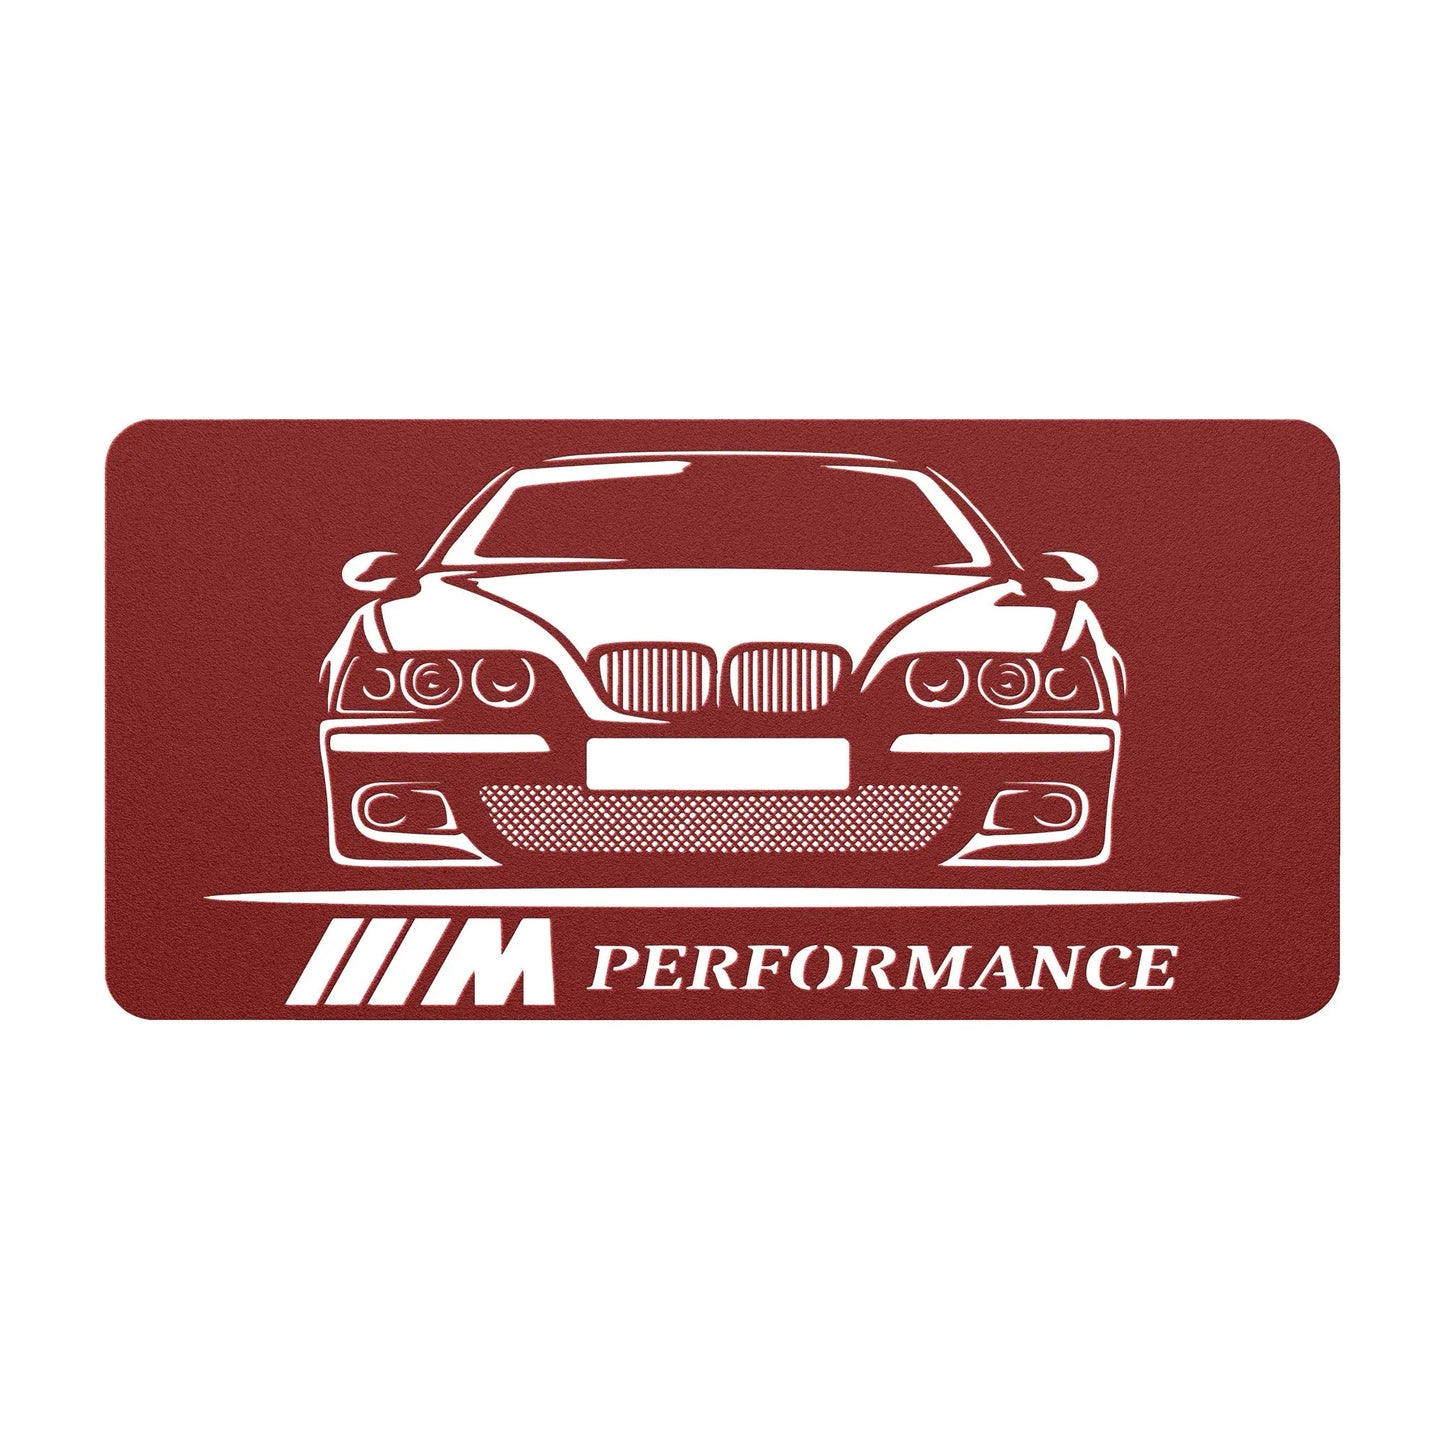 BMW E39 M5 Metal Sign - Custom Car Wall Art - Handcrafted Decor - Multiple Sizes & Colors - Garage, Man Cave, Office - Auto Enthusiast Gift